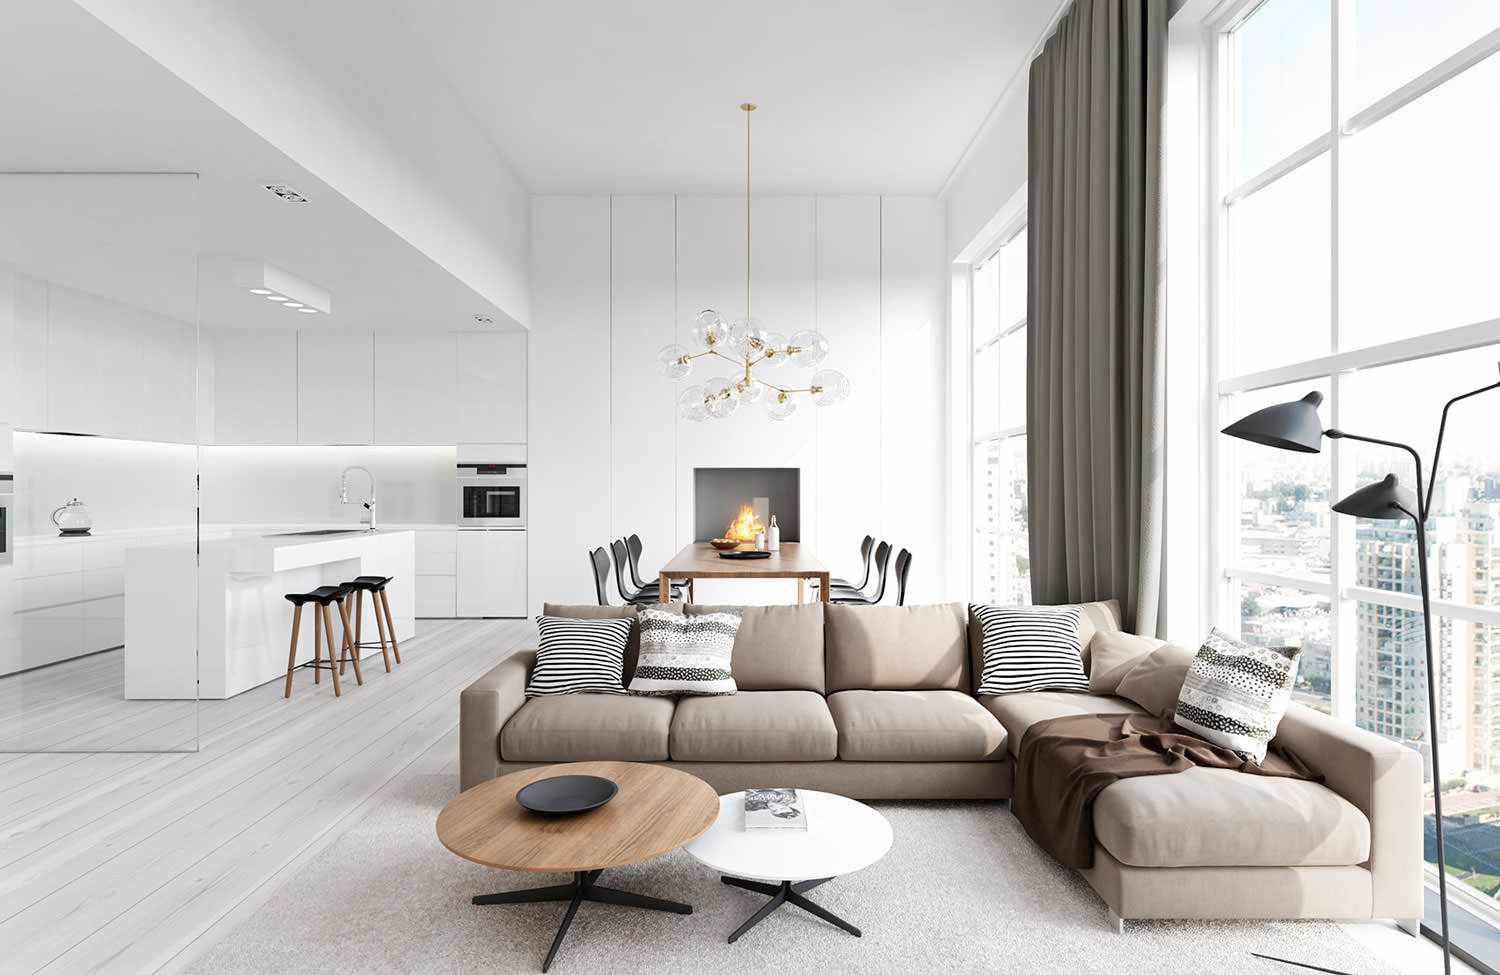 version of the application of a beautiful design of a living room in the style of minimalism